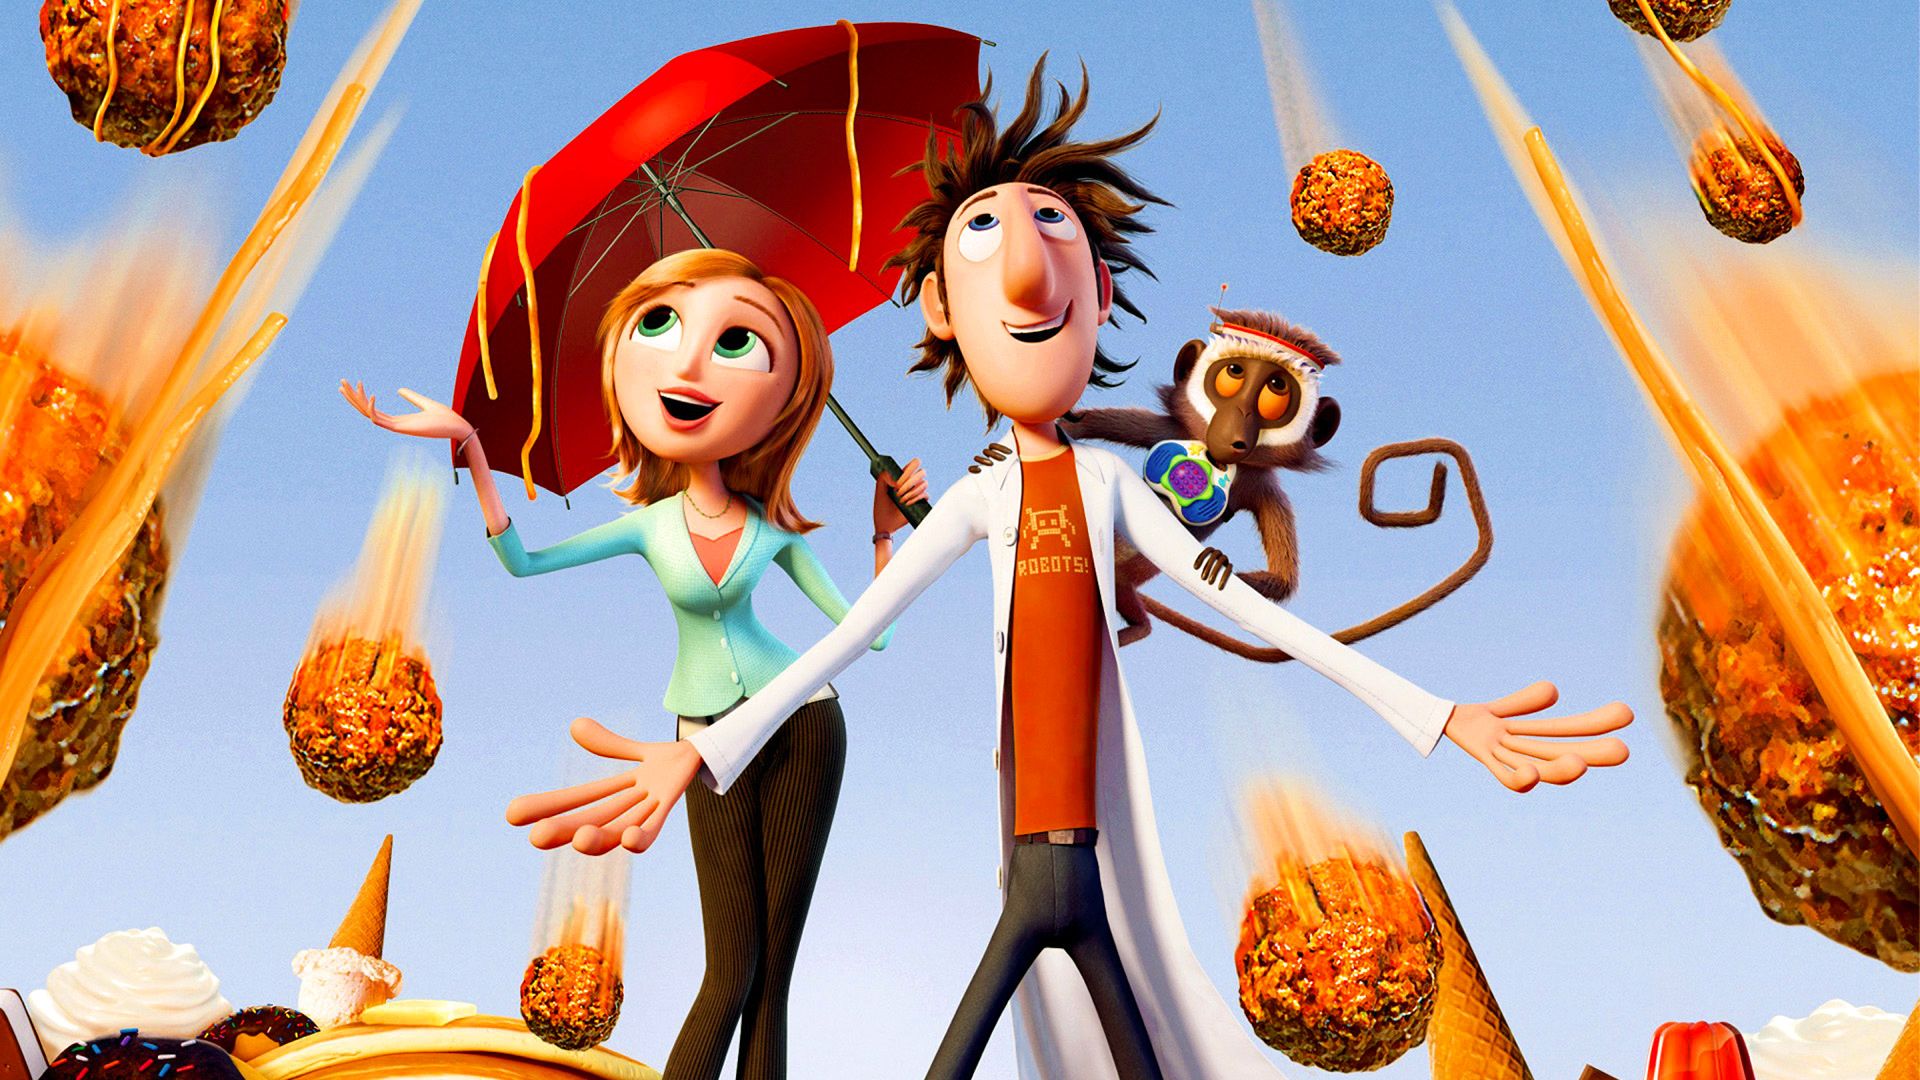 Cloudy with a Chance of Meatballs background